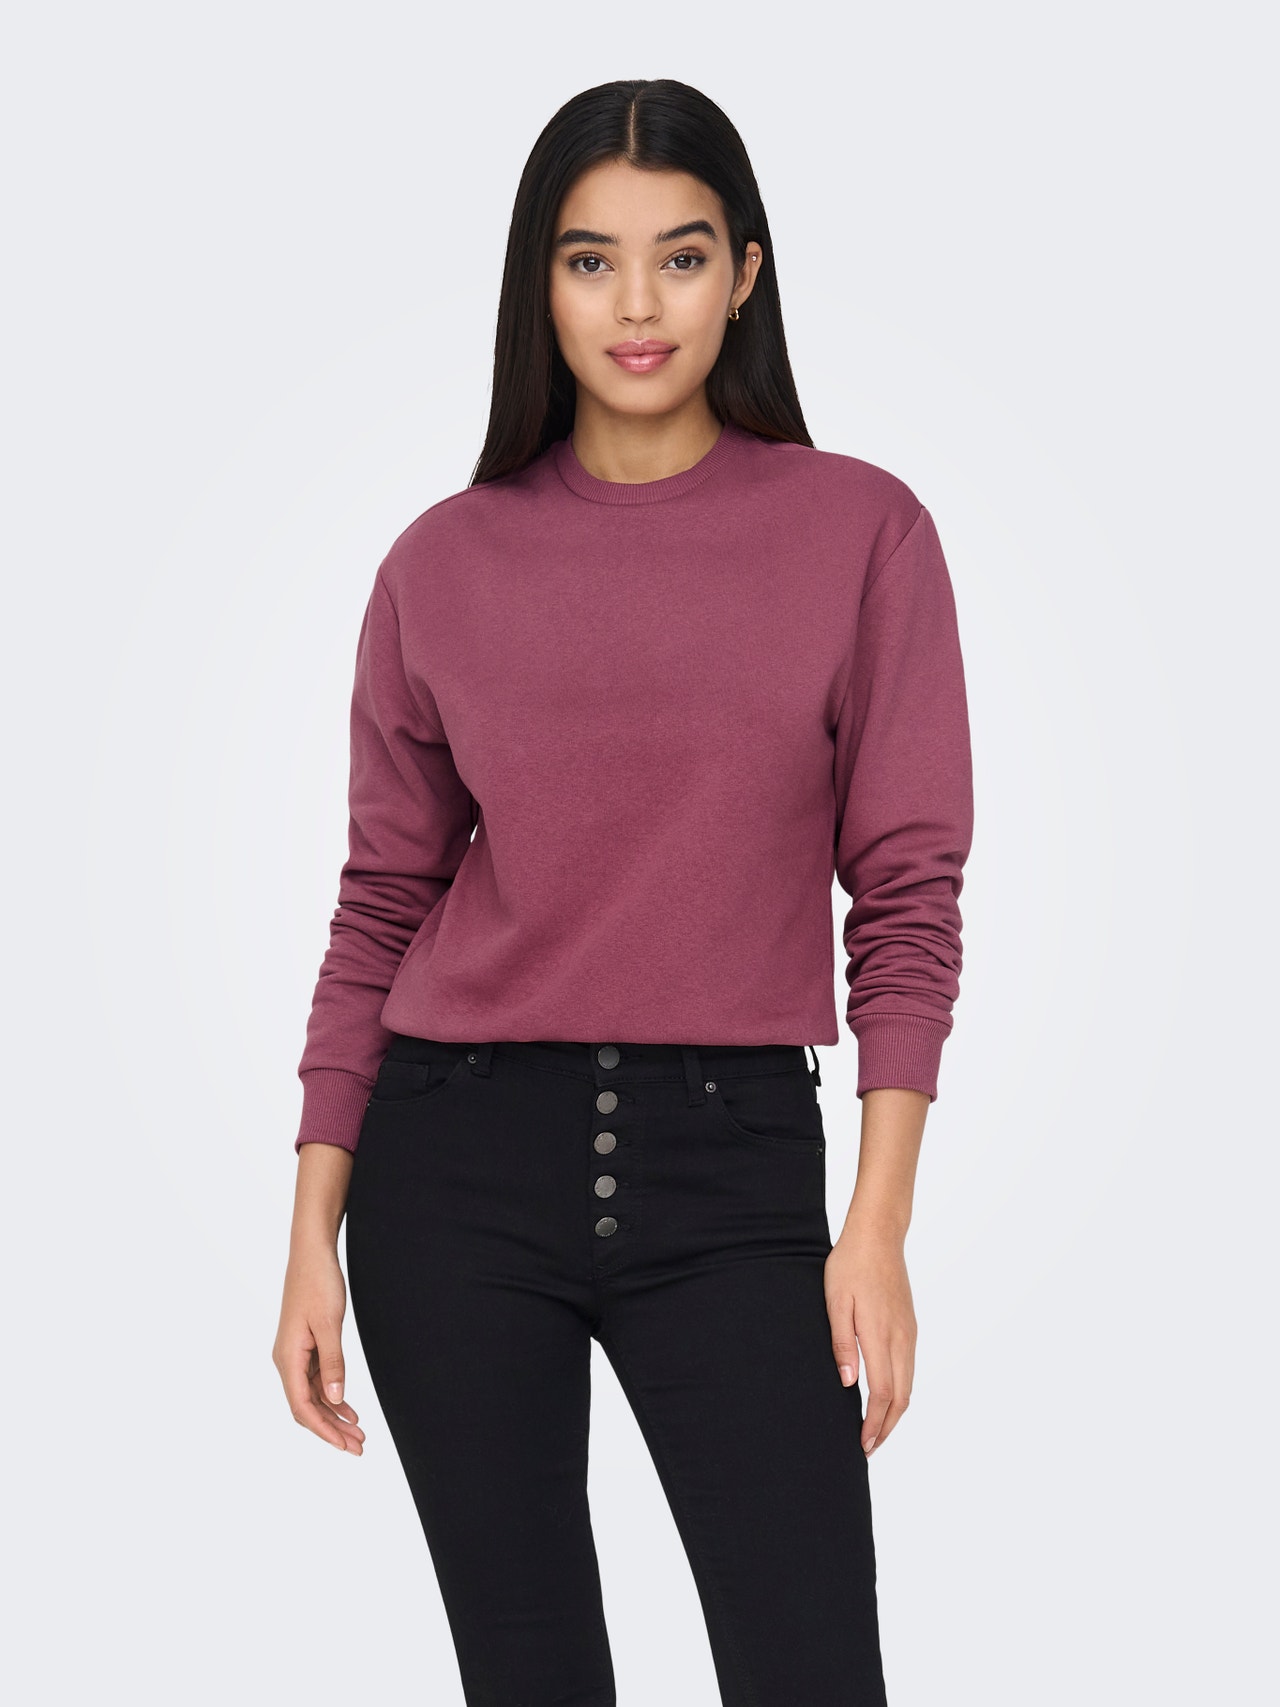 ONLY À manches longues Sweat-shirt -Crushed Berry - 15289279